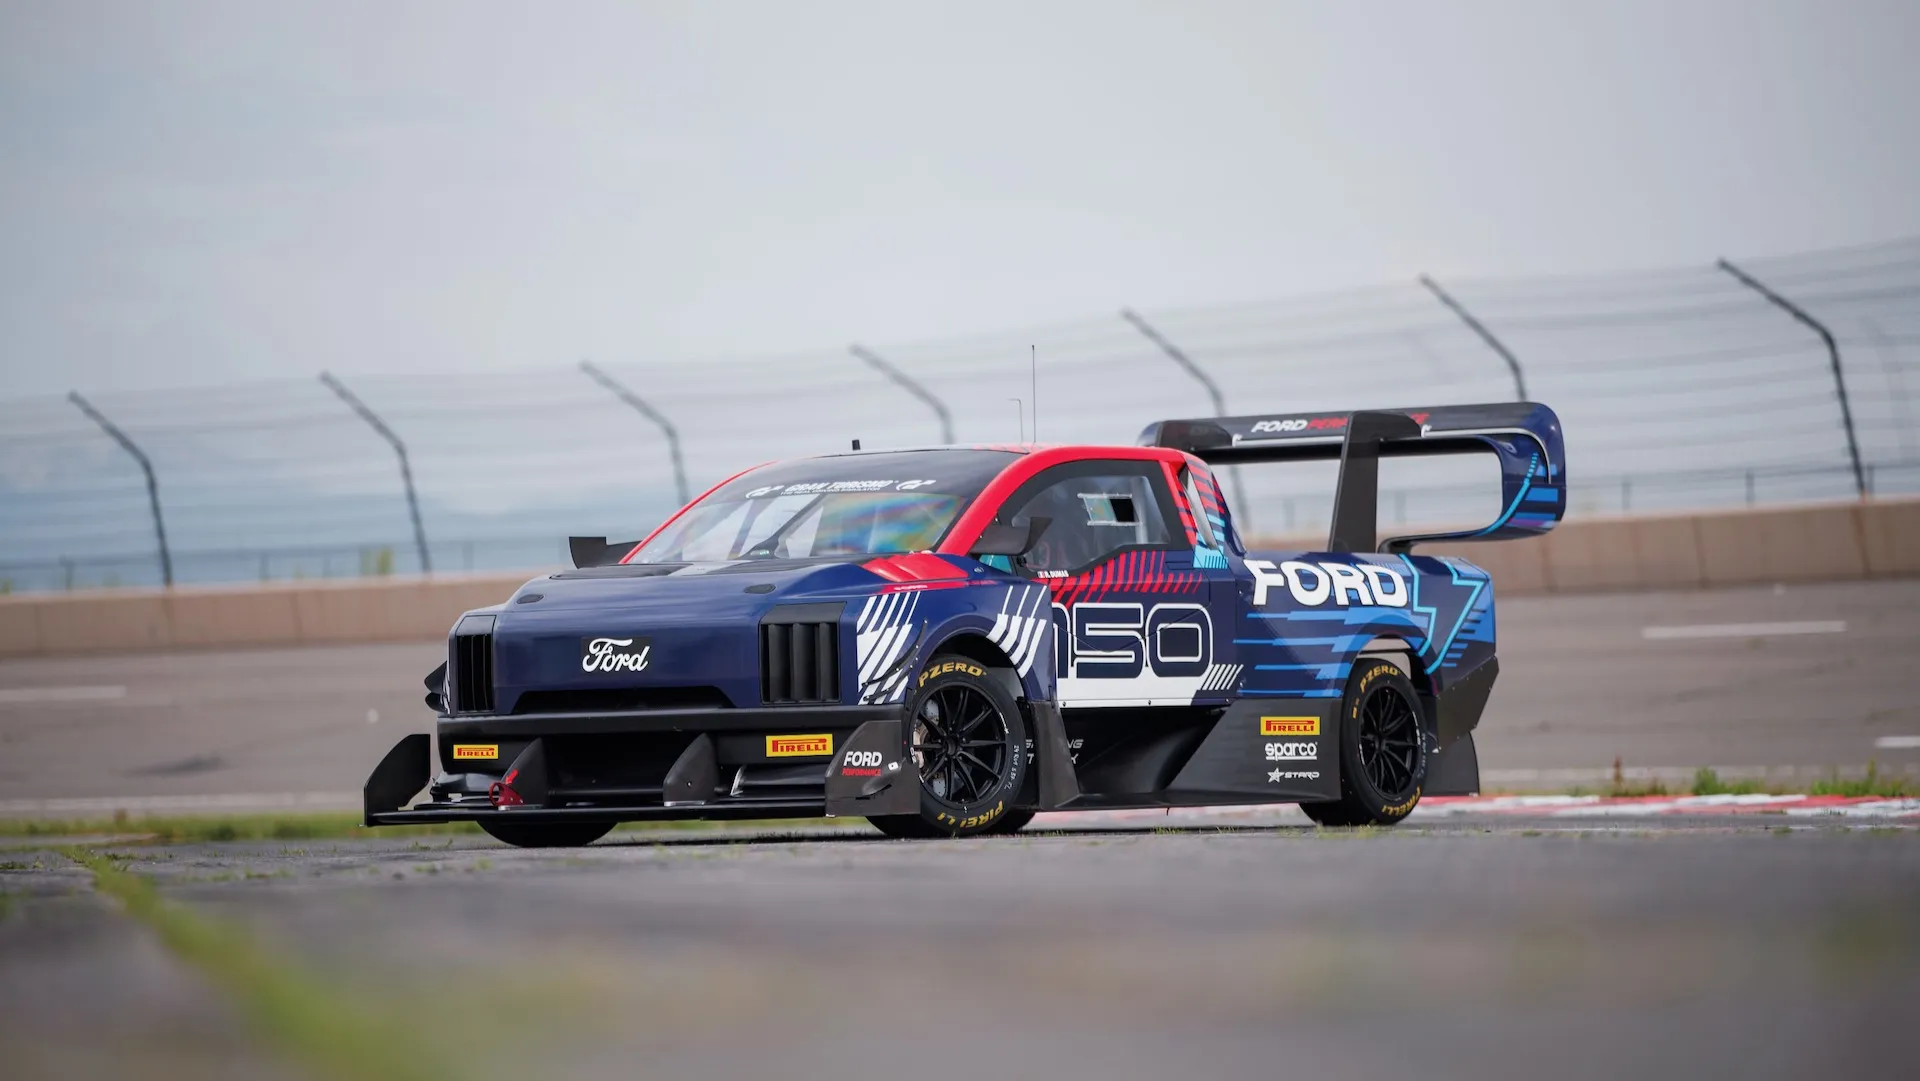 Ford F-150 Lightning SuperTruck shocks with over 1,400 hp to go with its 6,000 lb of downforce Auto Recent